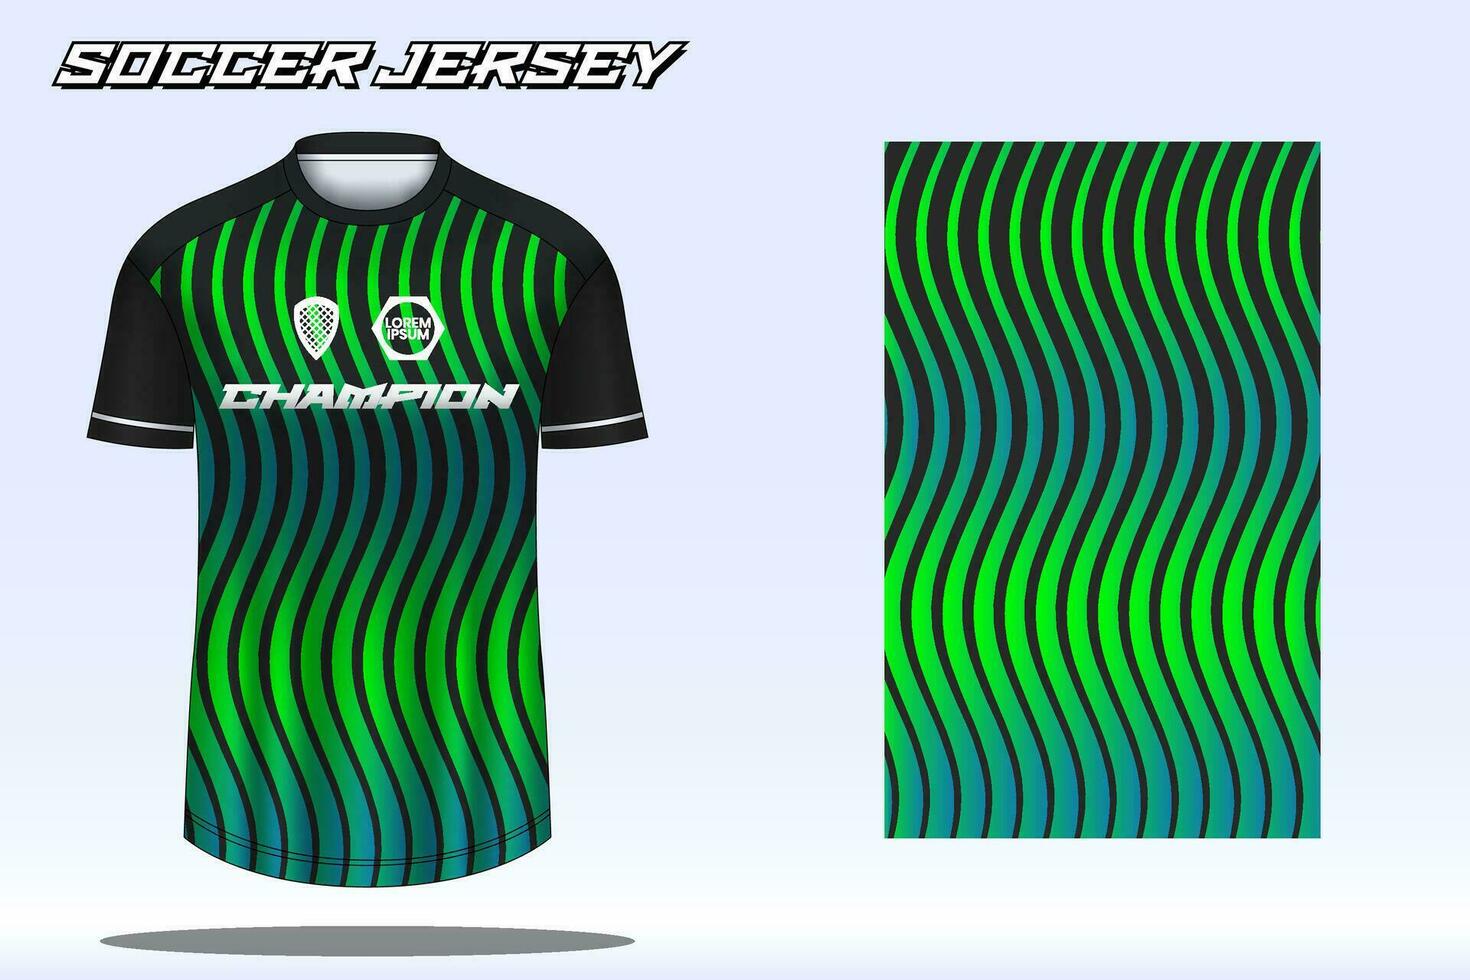 Soccer jersey mockup for football club. Vector sublimation sports apparel design. Uniform front view templates football jersey.